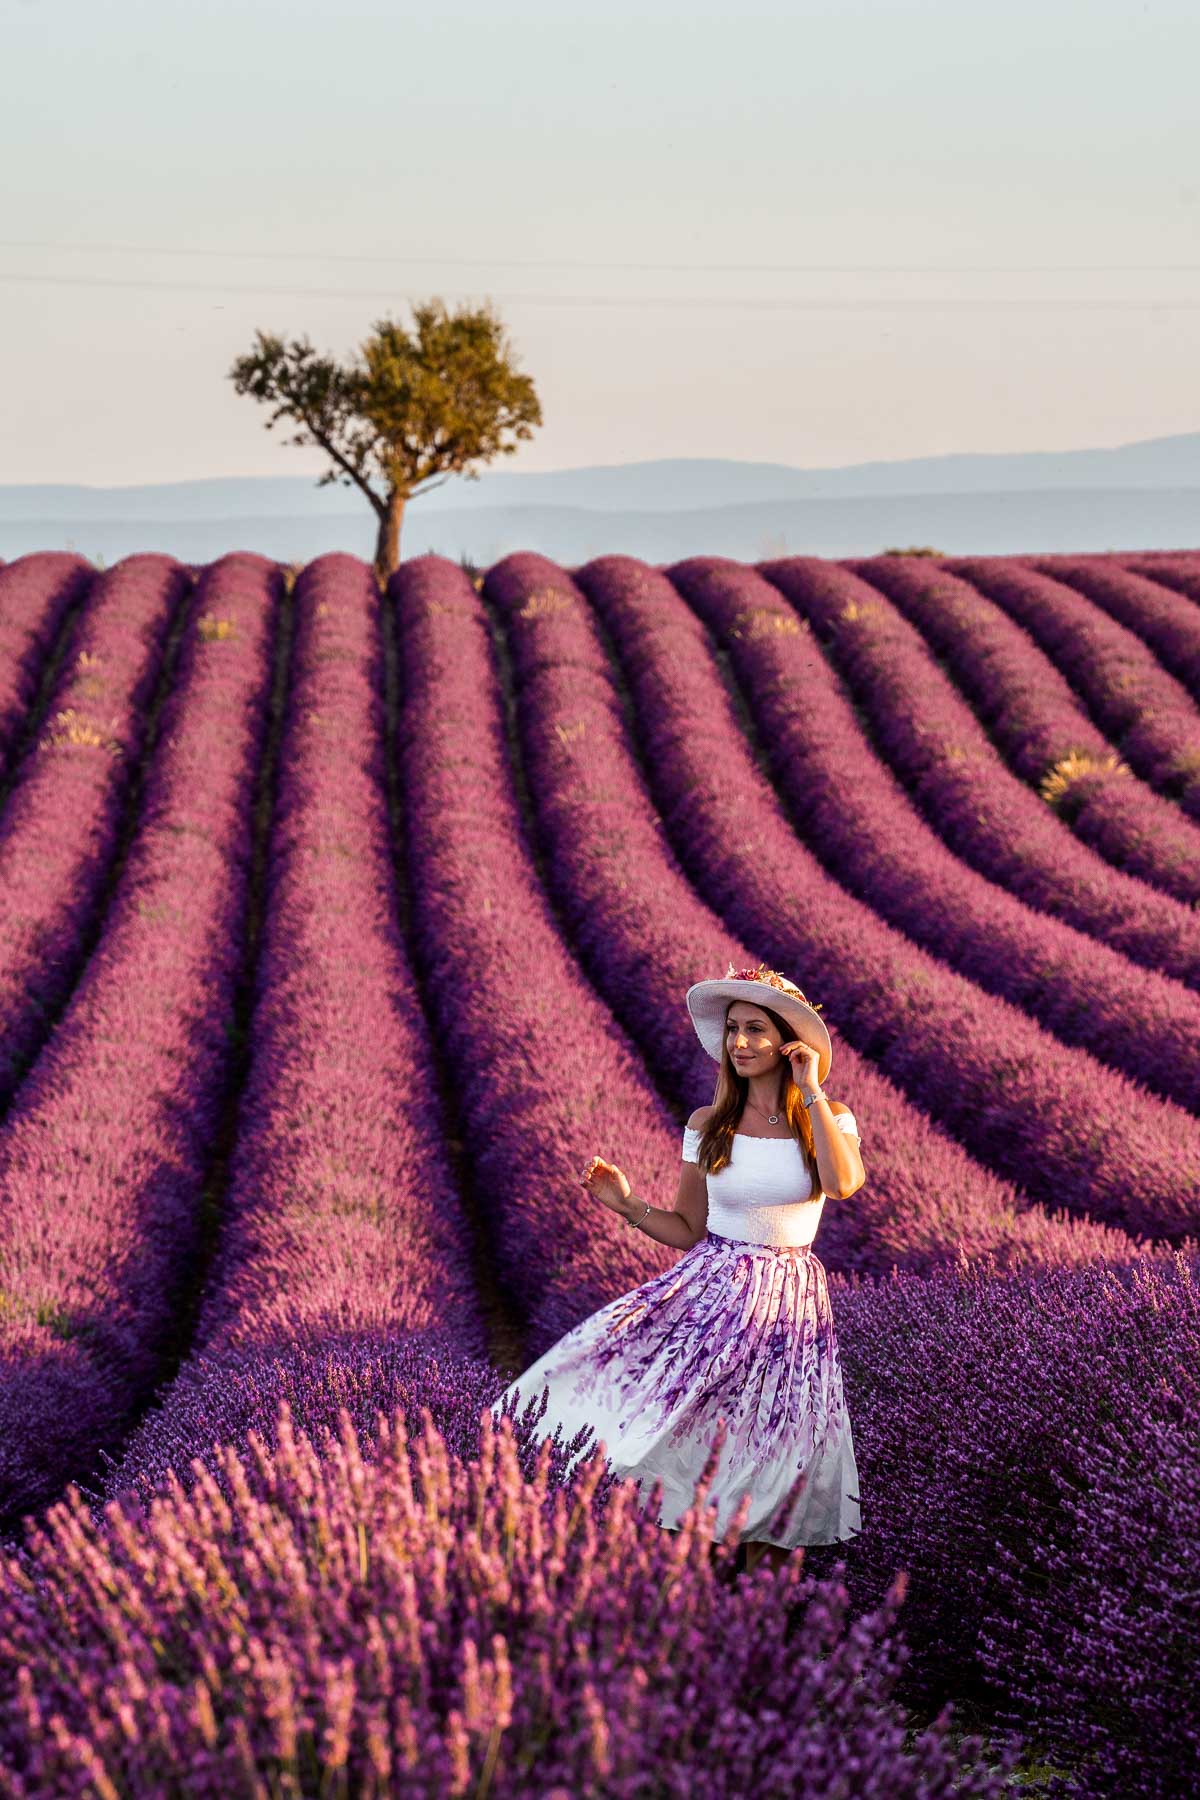 Girl in a purple skirt standing in the lavender fields with a heart shaped tree in the background in Provence